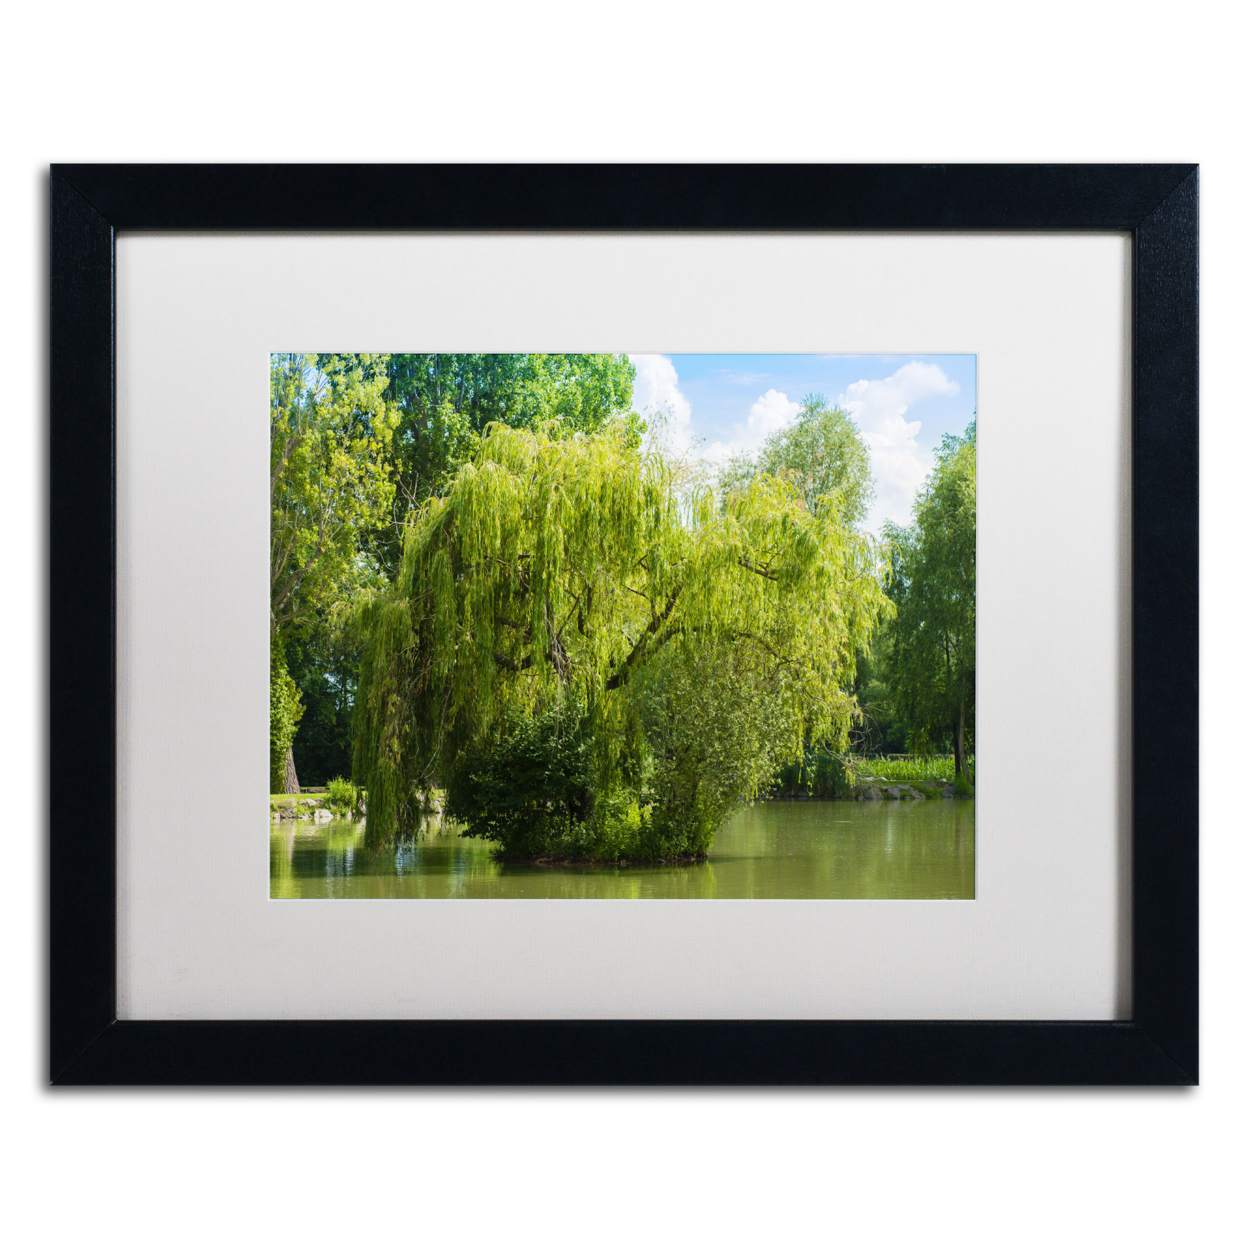 Philippe Sainte-Laudy 'Pond And Paintography' Black Wooden Framed Art 18 X 22 Inches